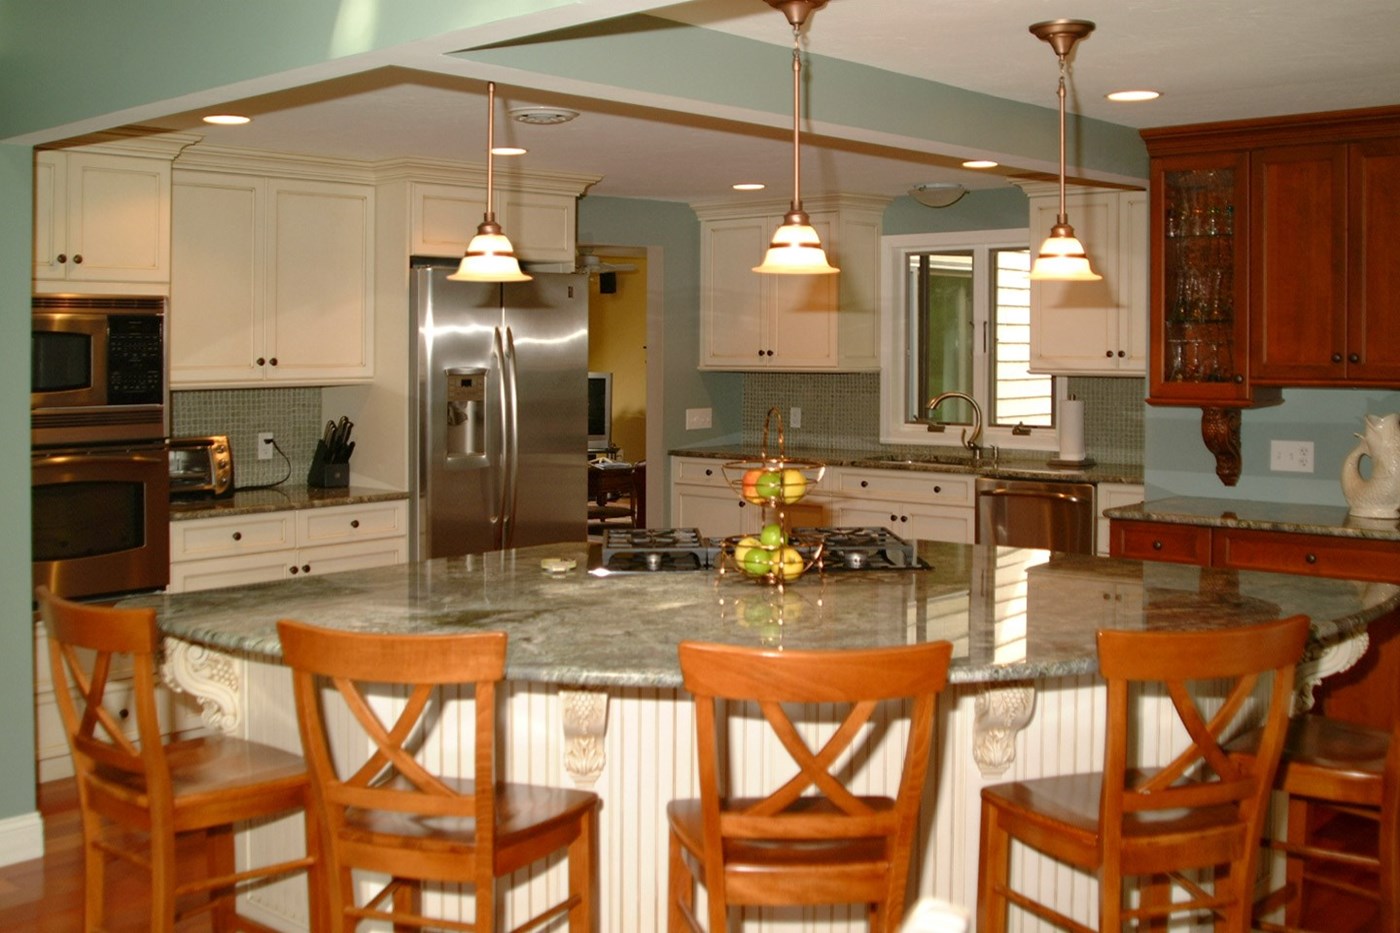 Kitchen (Island seating for 6)